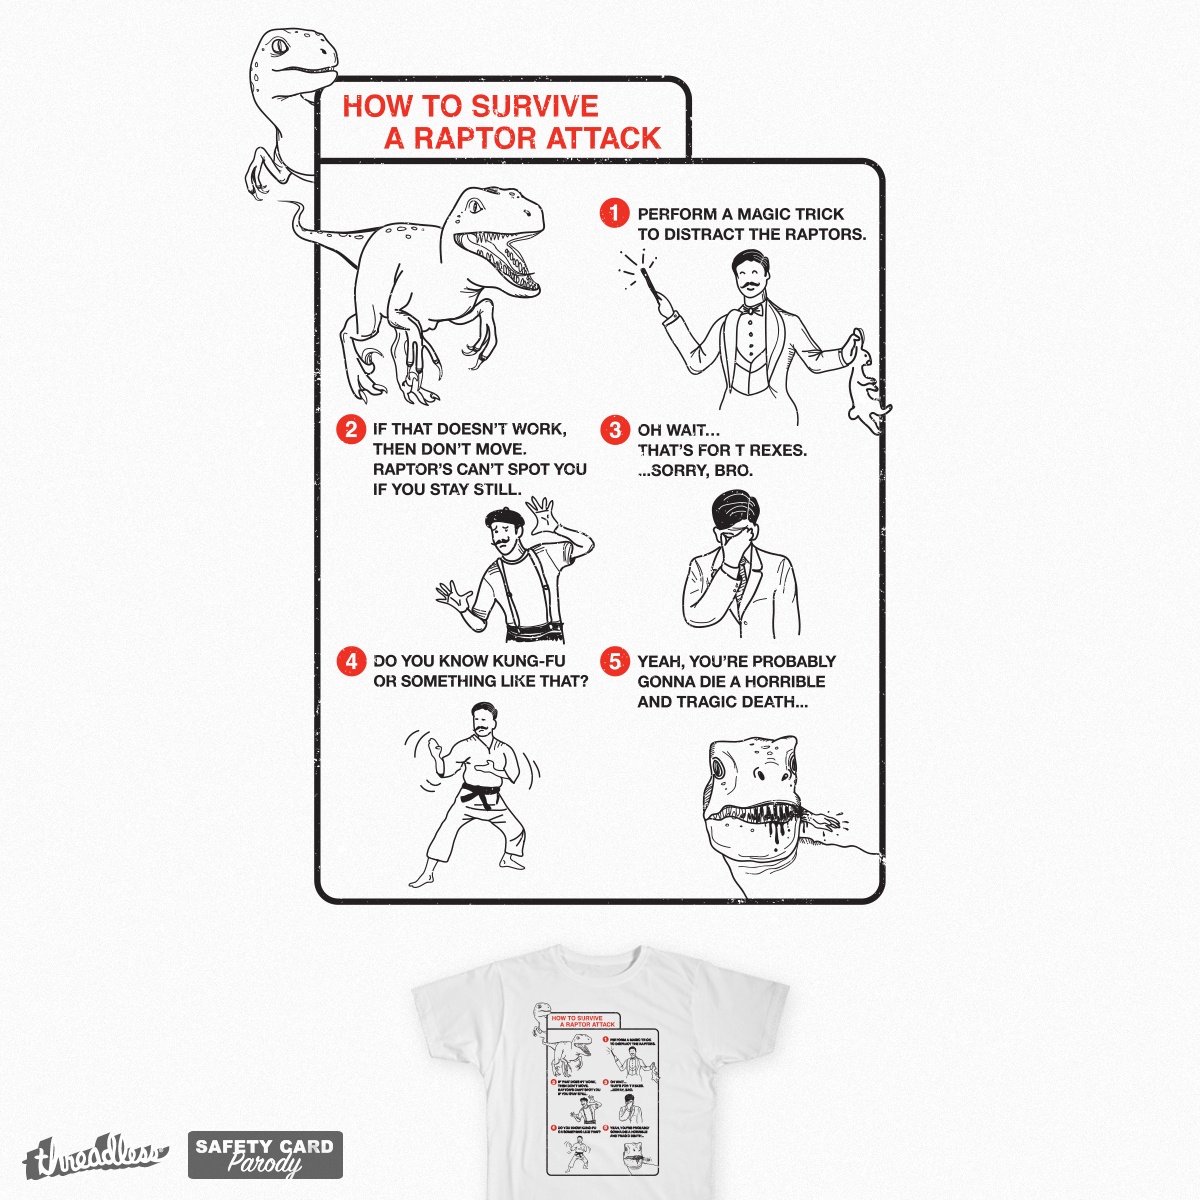 How to survive a raptor attack, a cool t-shirt design